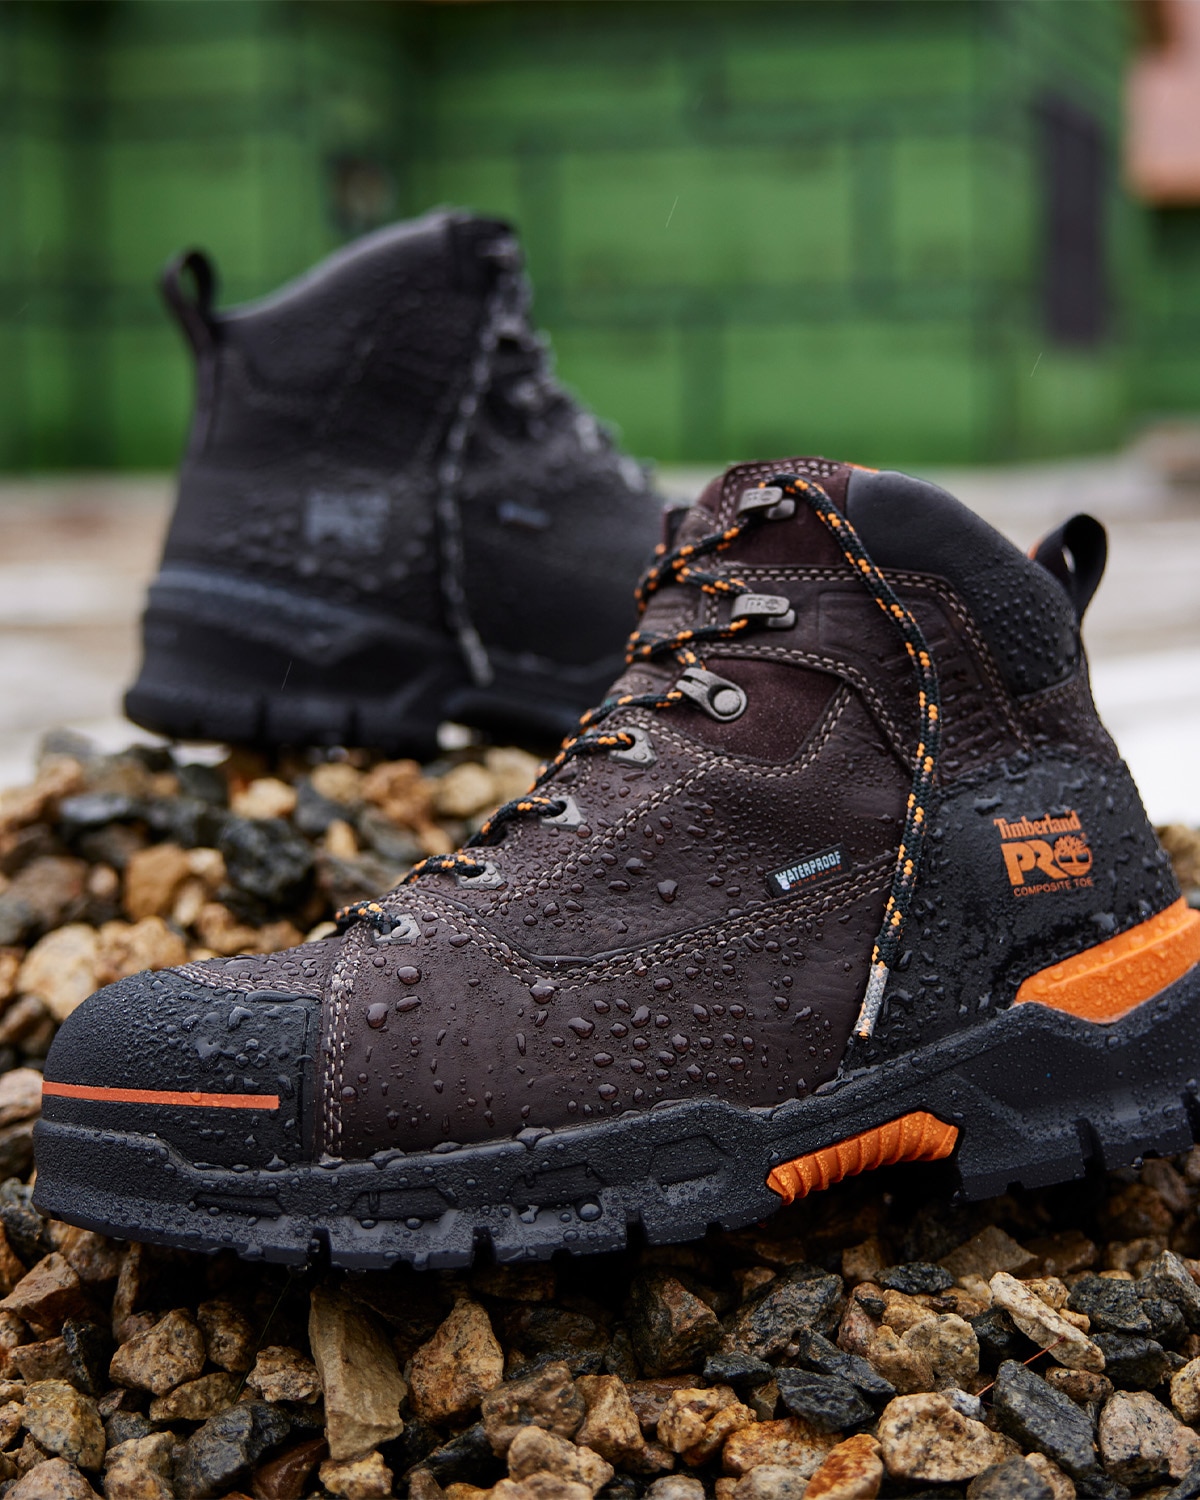 image of a pair of Timberland PRO boots with water drops sitting on a pile of rocks near water